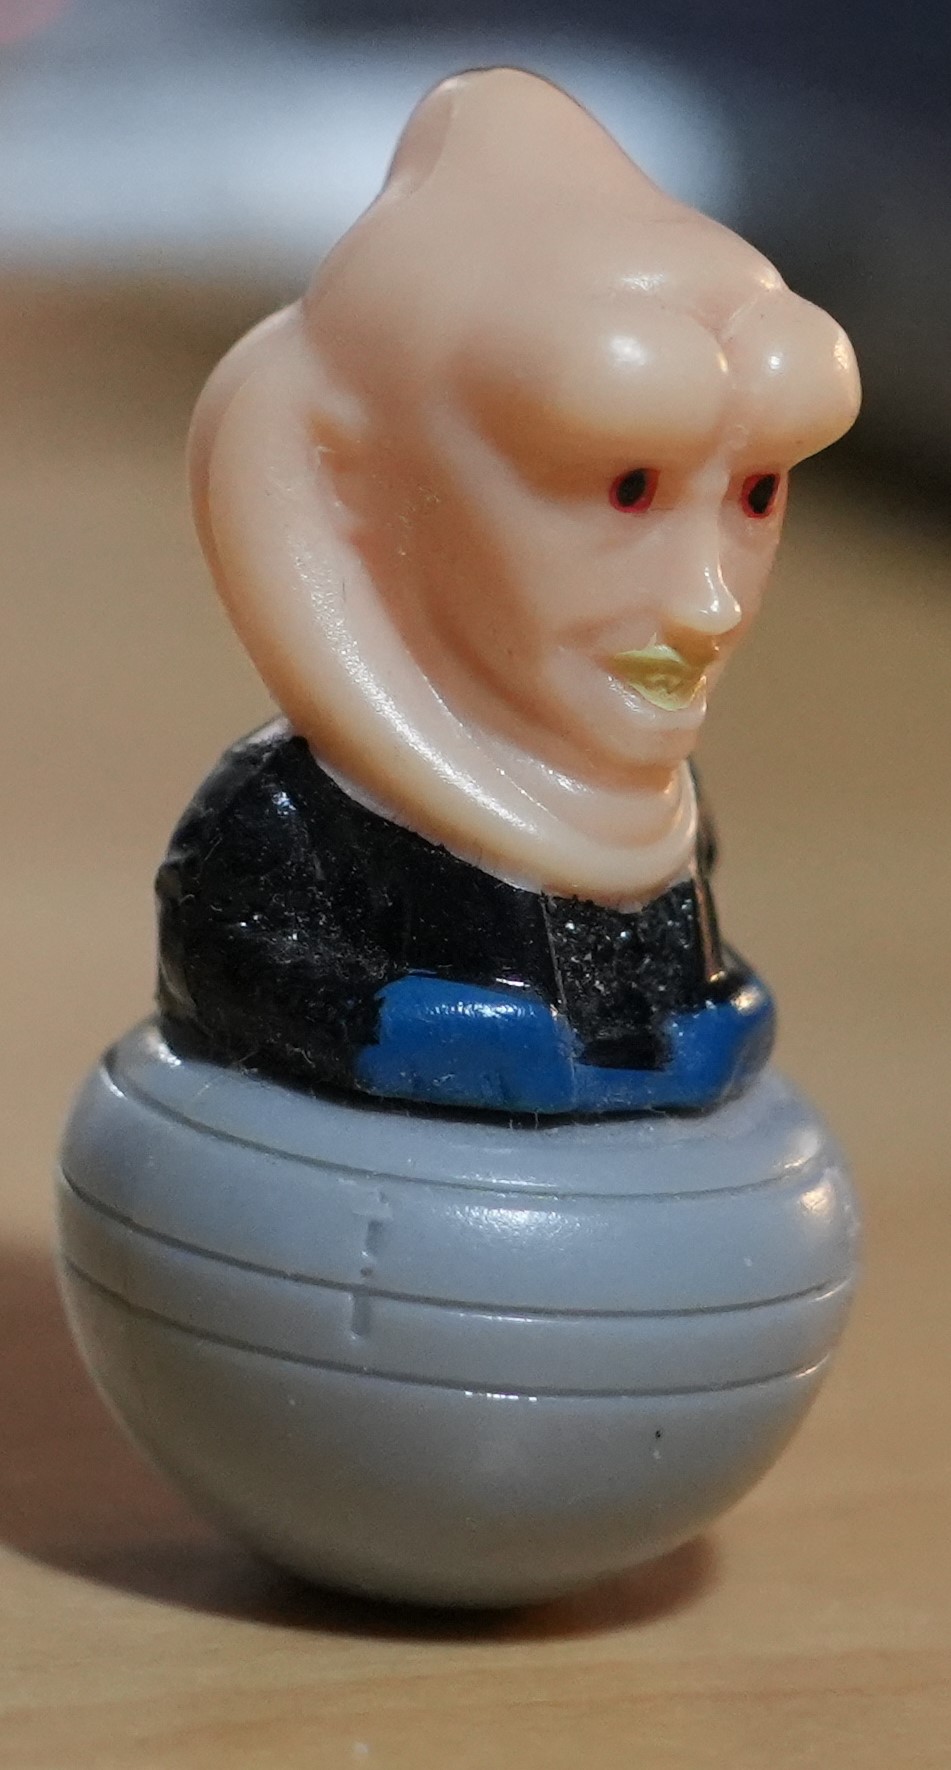 An ugly plastic figurine, depicting the bust and head of Bib Fortuna, with a ridged grey sphere instead of his legs.